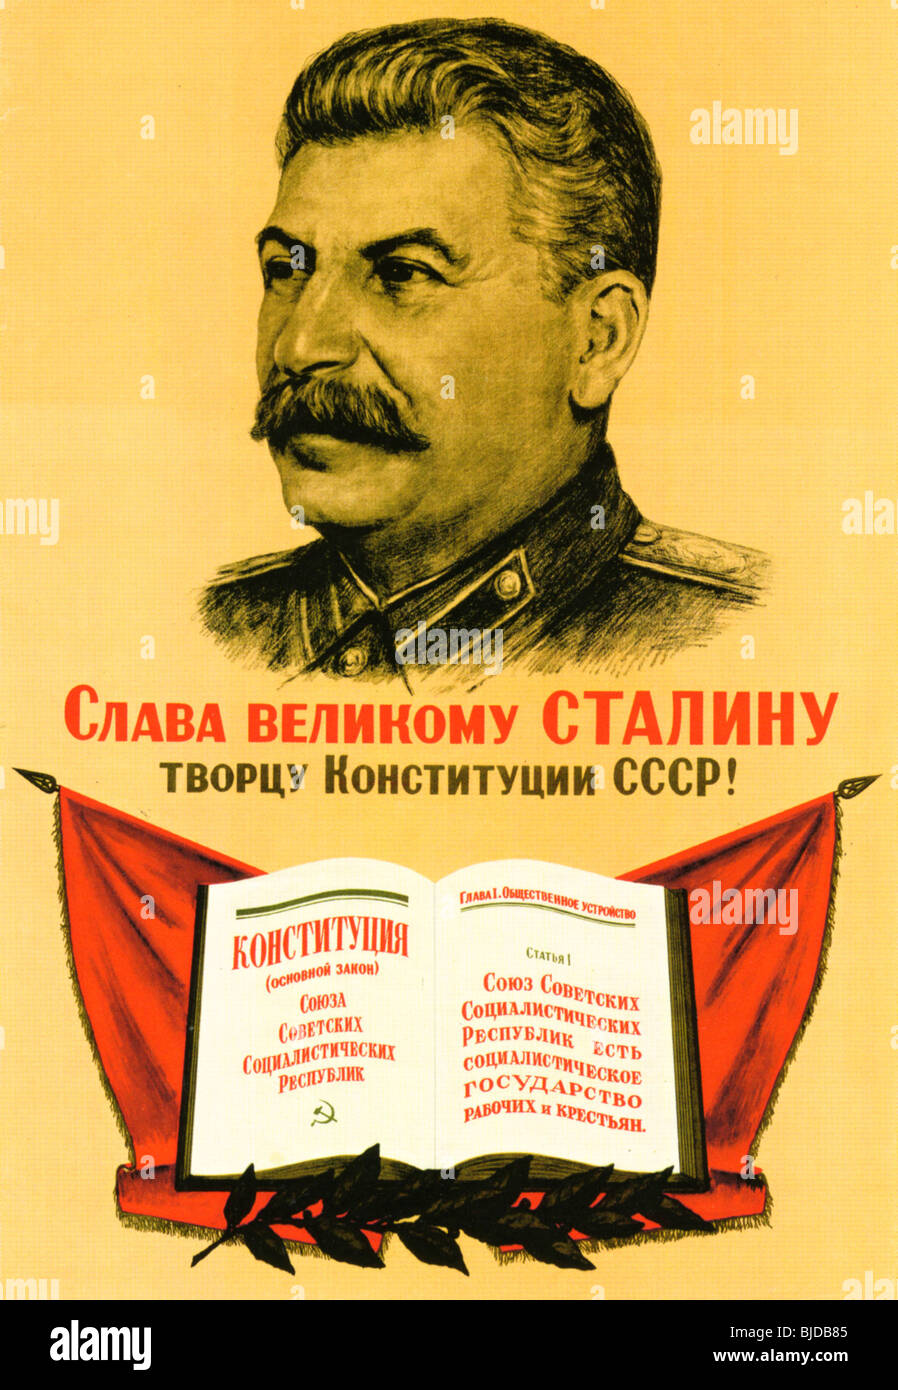 JOSEPH STALIN - 1946 Soviet  poster proclaims: 'Glory to great Stalin, creator of the USSR constitution' Stock Photo